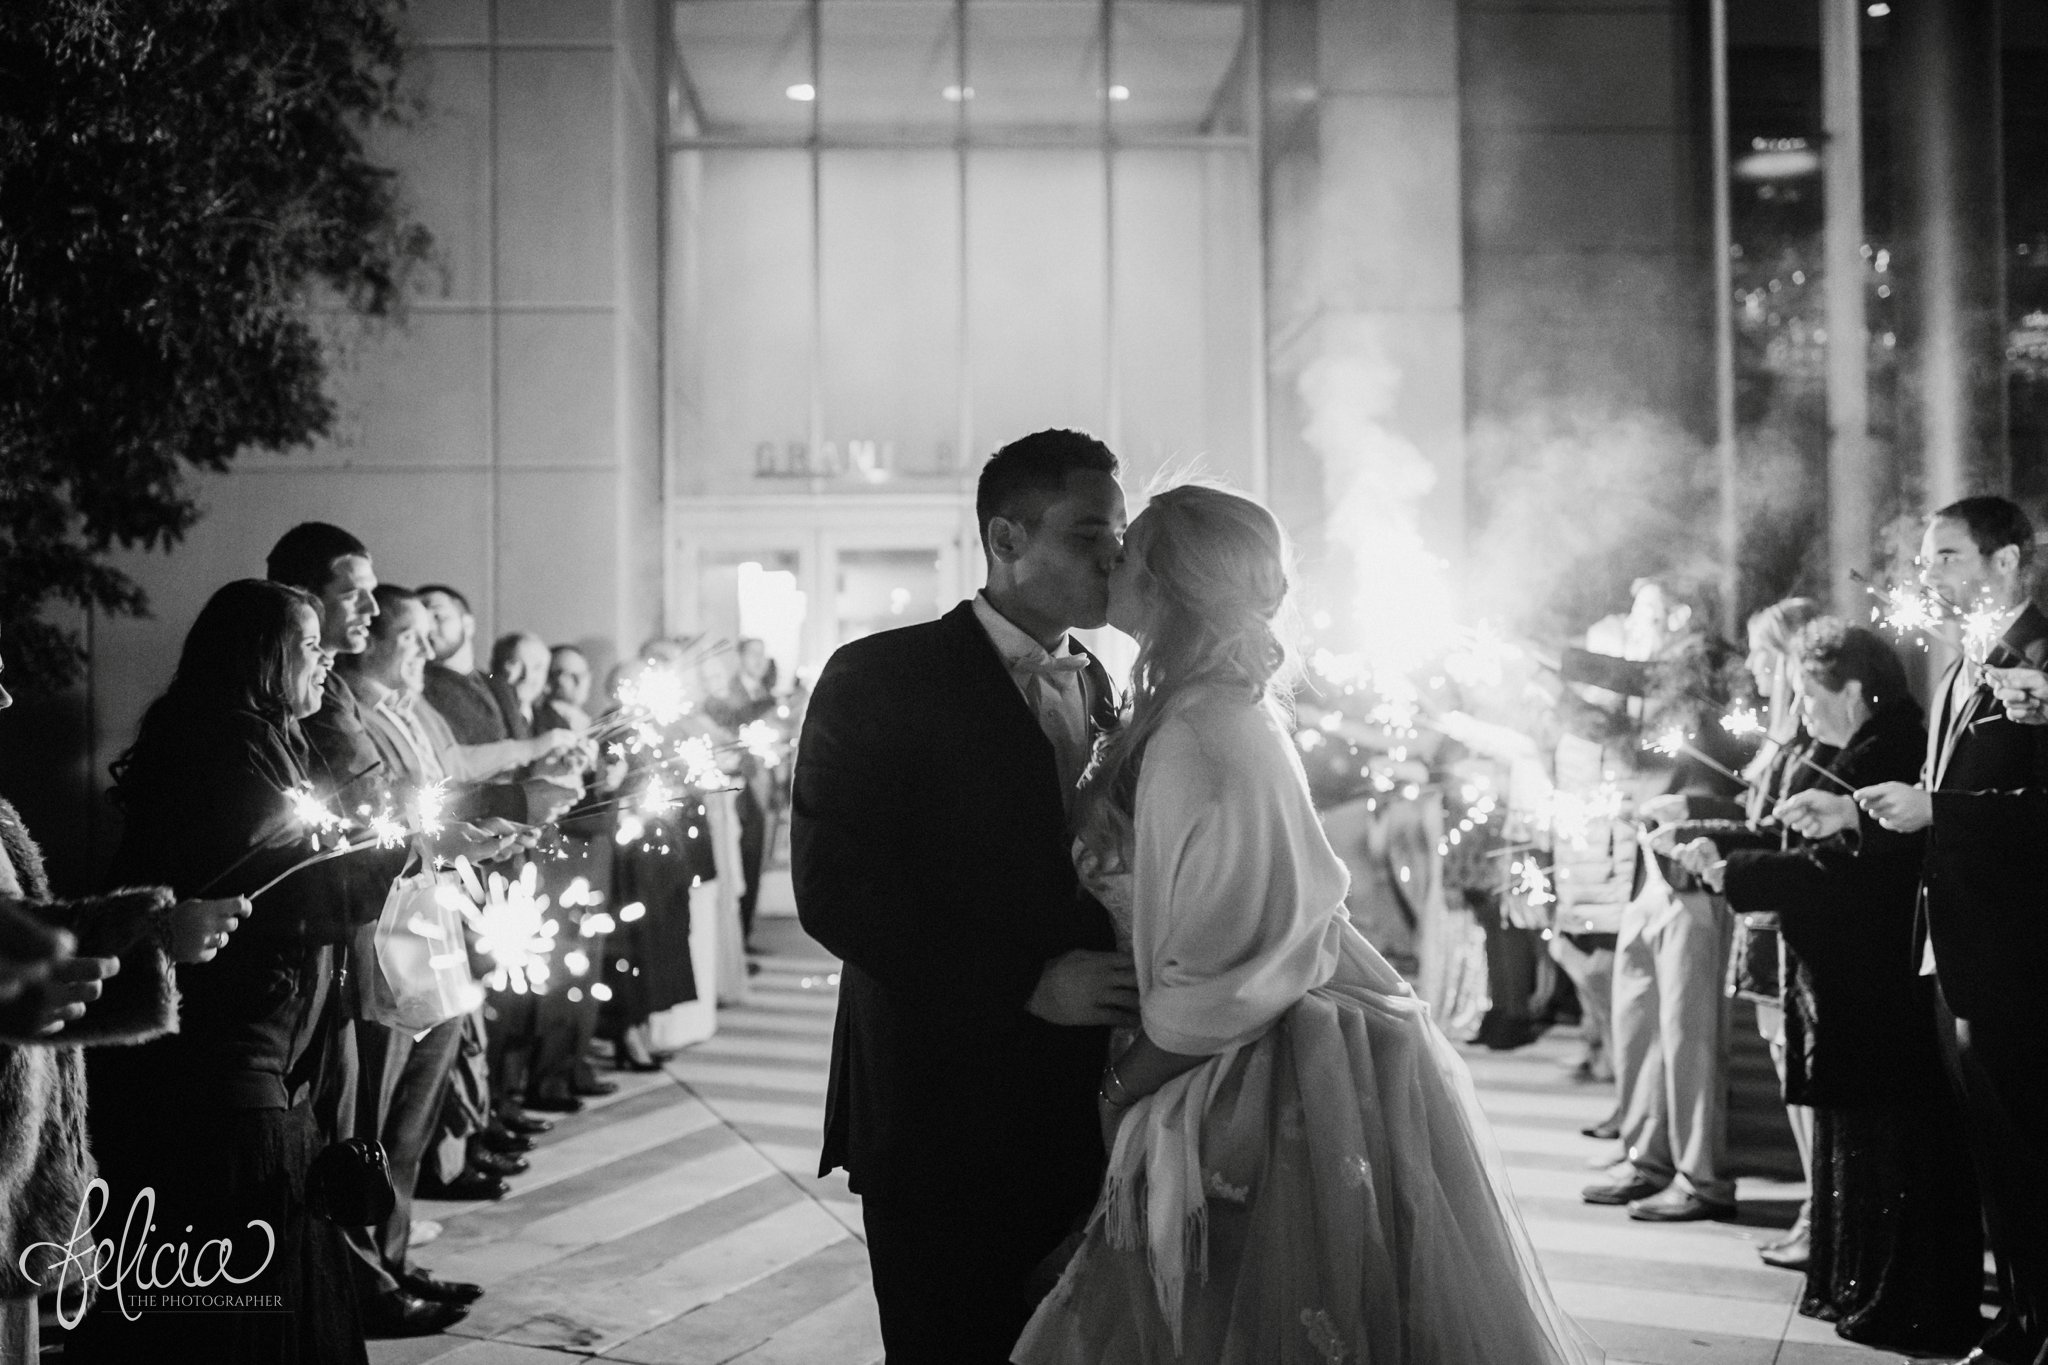 images by feliciathephotographer.com | wedding photographer | downtown kansas city | grand exit | sparklers | celebration | kc convention center | glamorous | lace tiered dress | family and friends | kiss | black and white | 